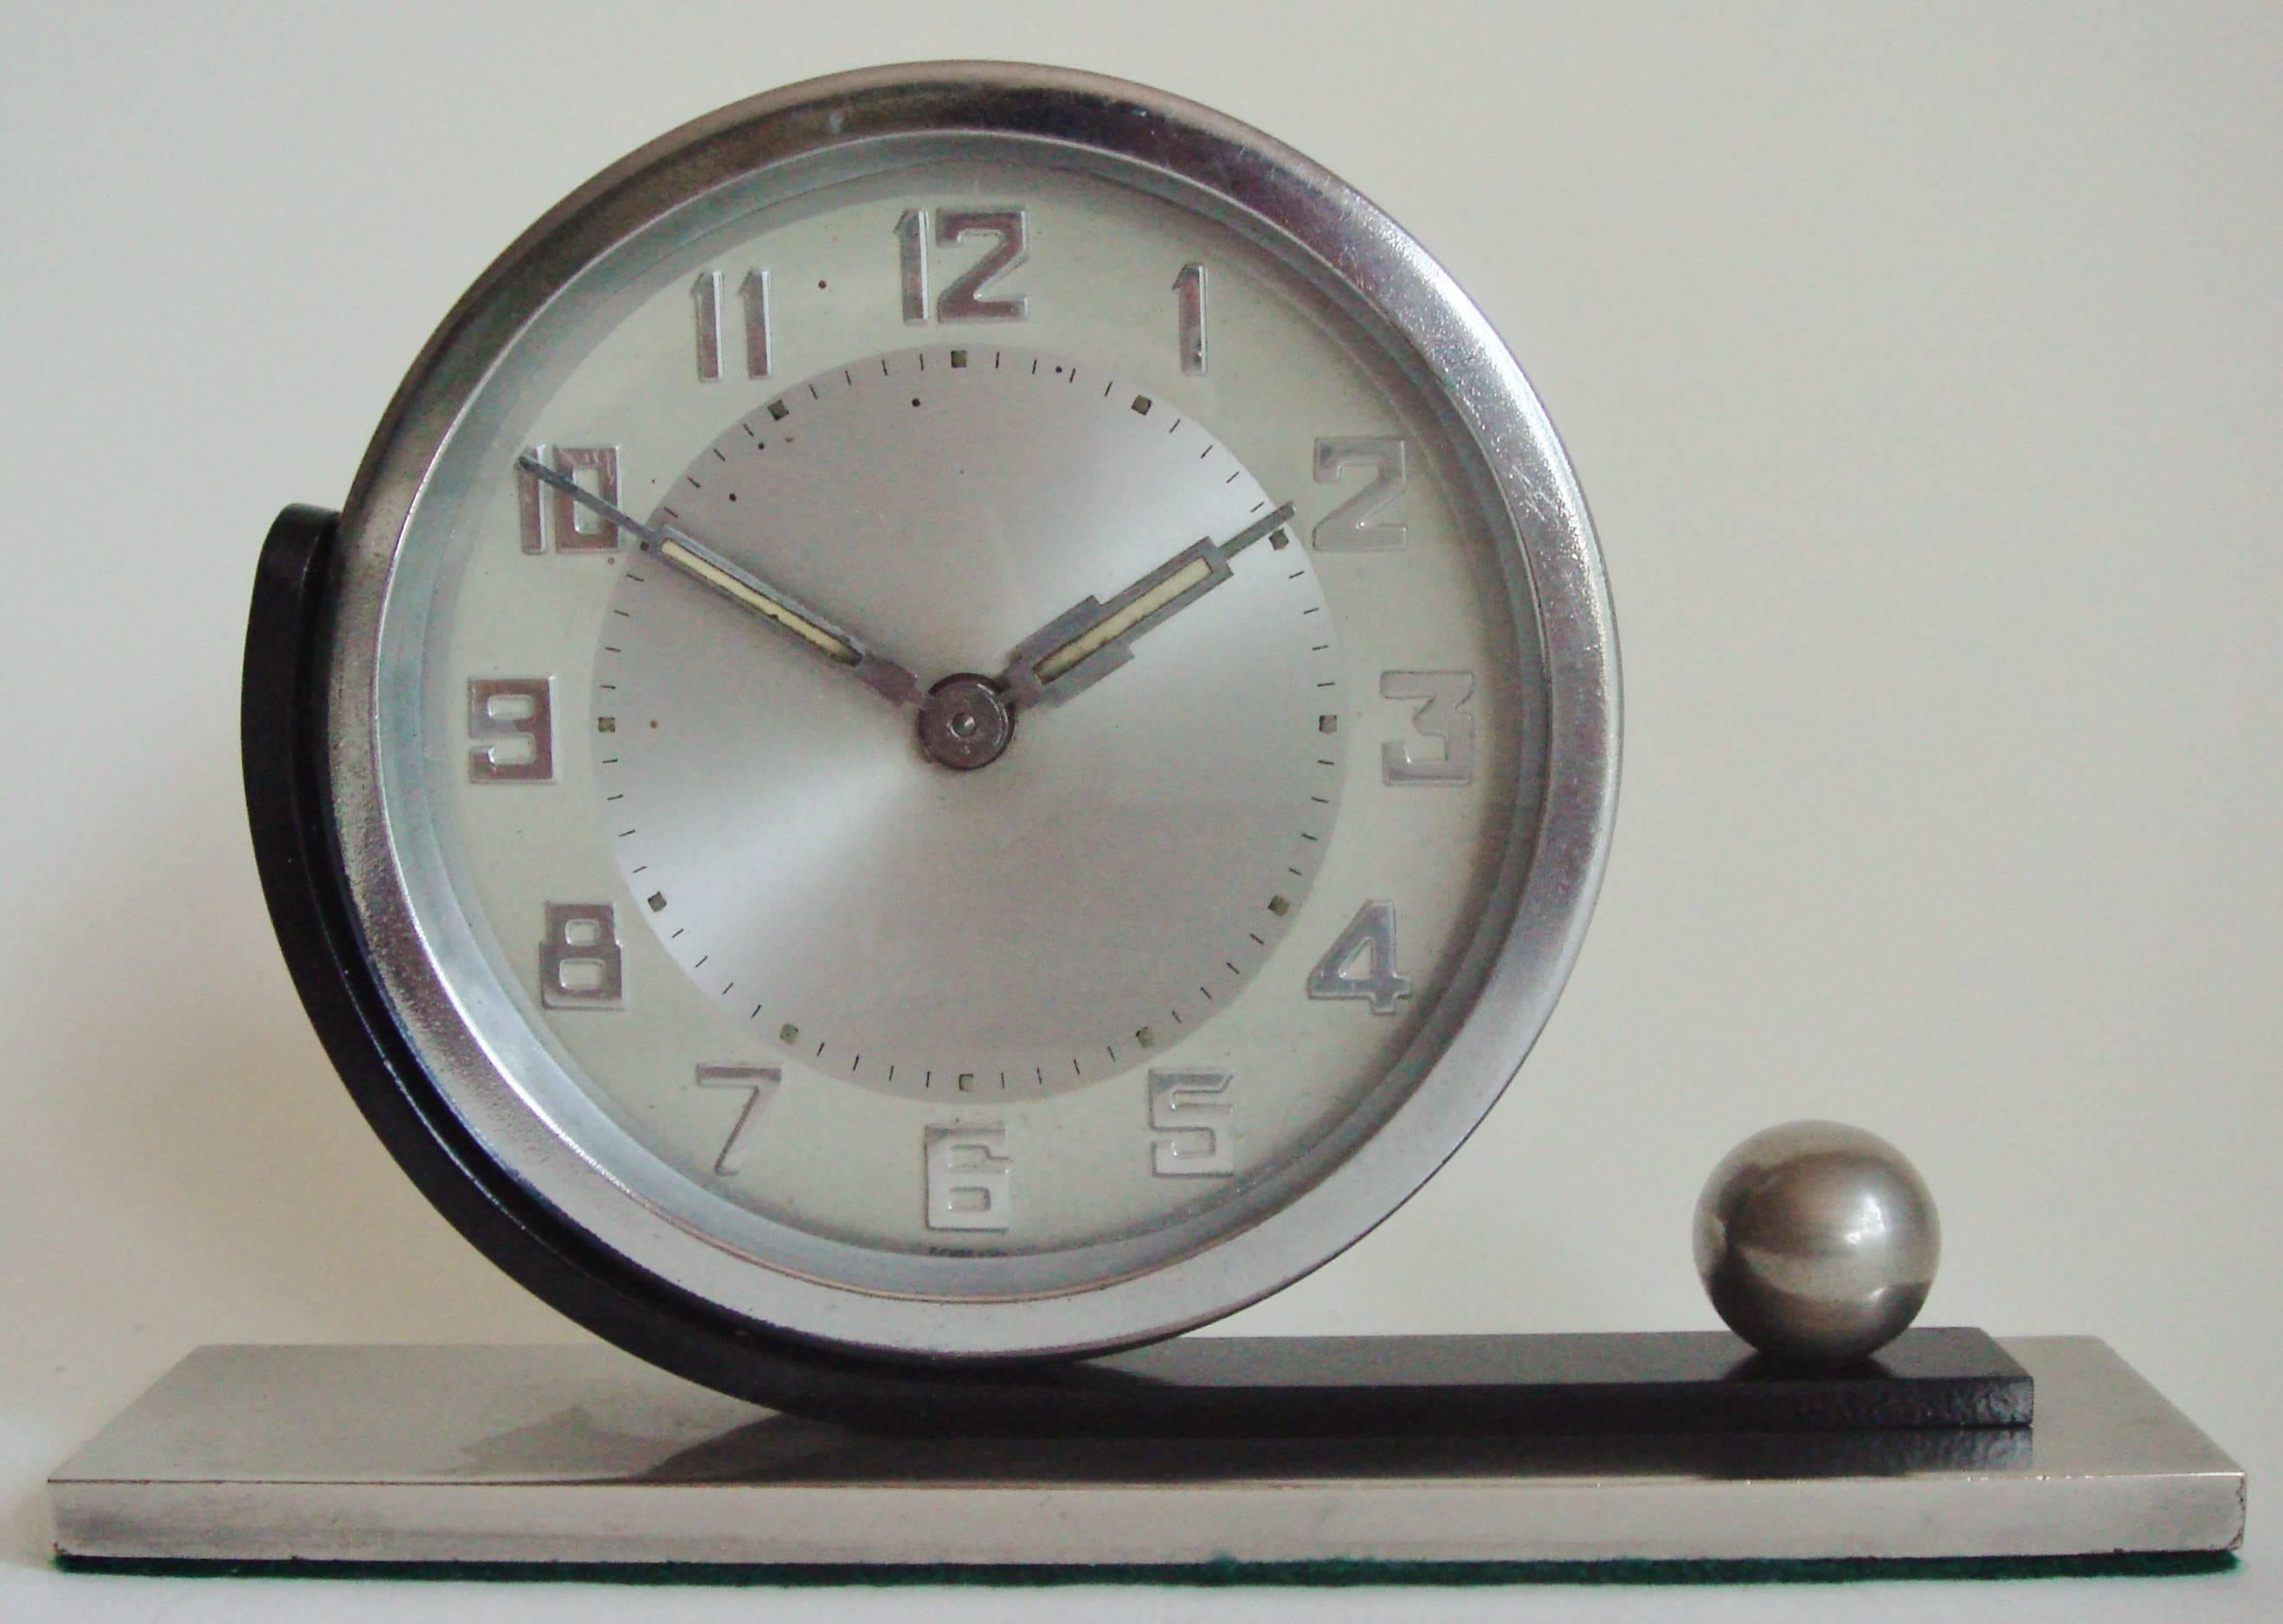 This German Art Deco asymmetrical table clock features a round clock with a chrome bezel held on a curved blackened steel arm that is anchored at one end by a brushed steel sphere. This is mounted to a solid brushed steel base with a green felt